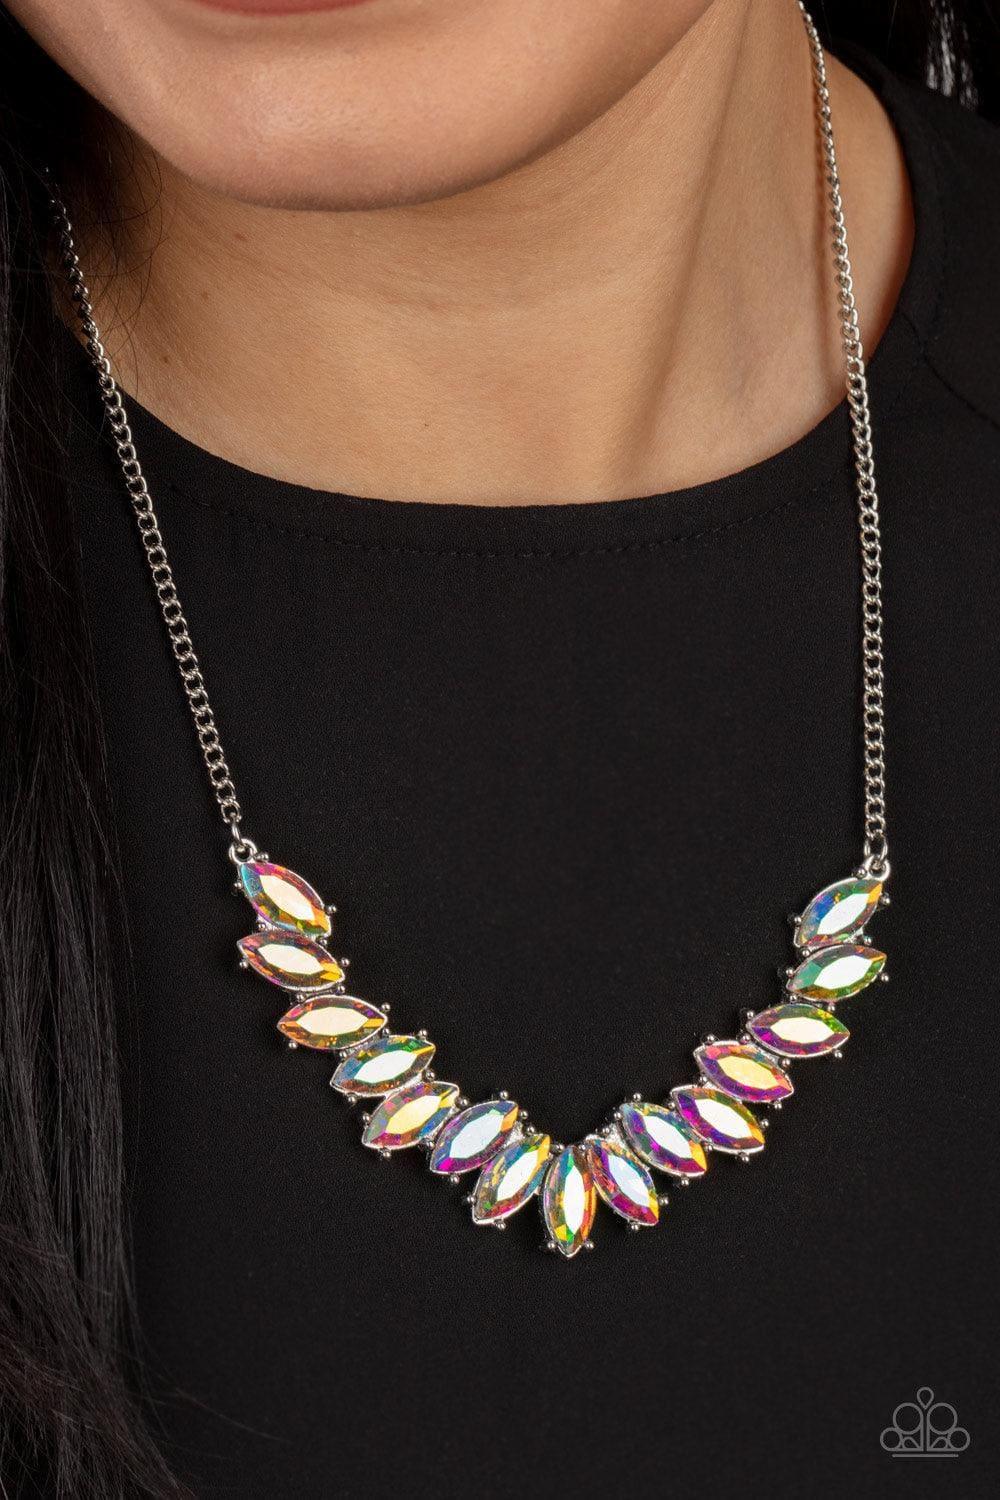 Paparazzi Accessories - Galaxy Game-changer - Multicolor Necklace - Bling by JessieK